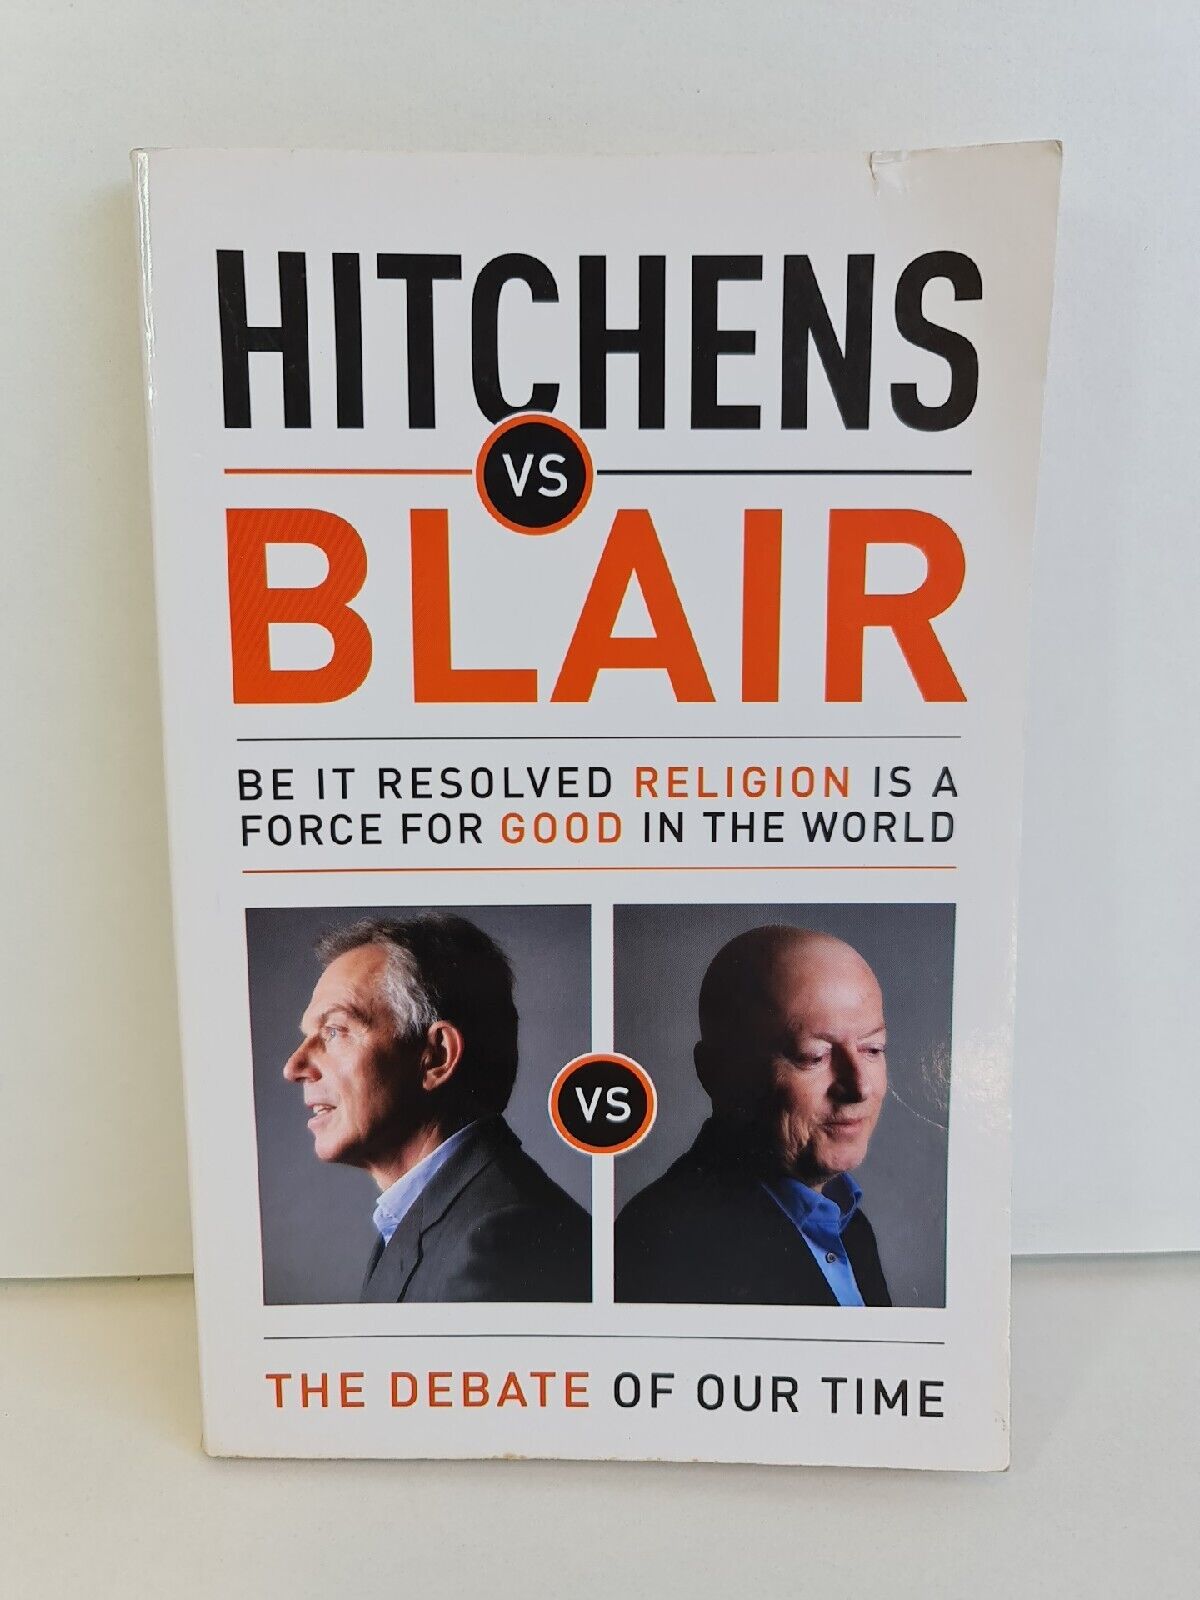 Hitchens vs Blair: Be it Resolved Religion is a Force for Good (2011)